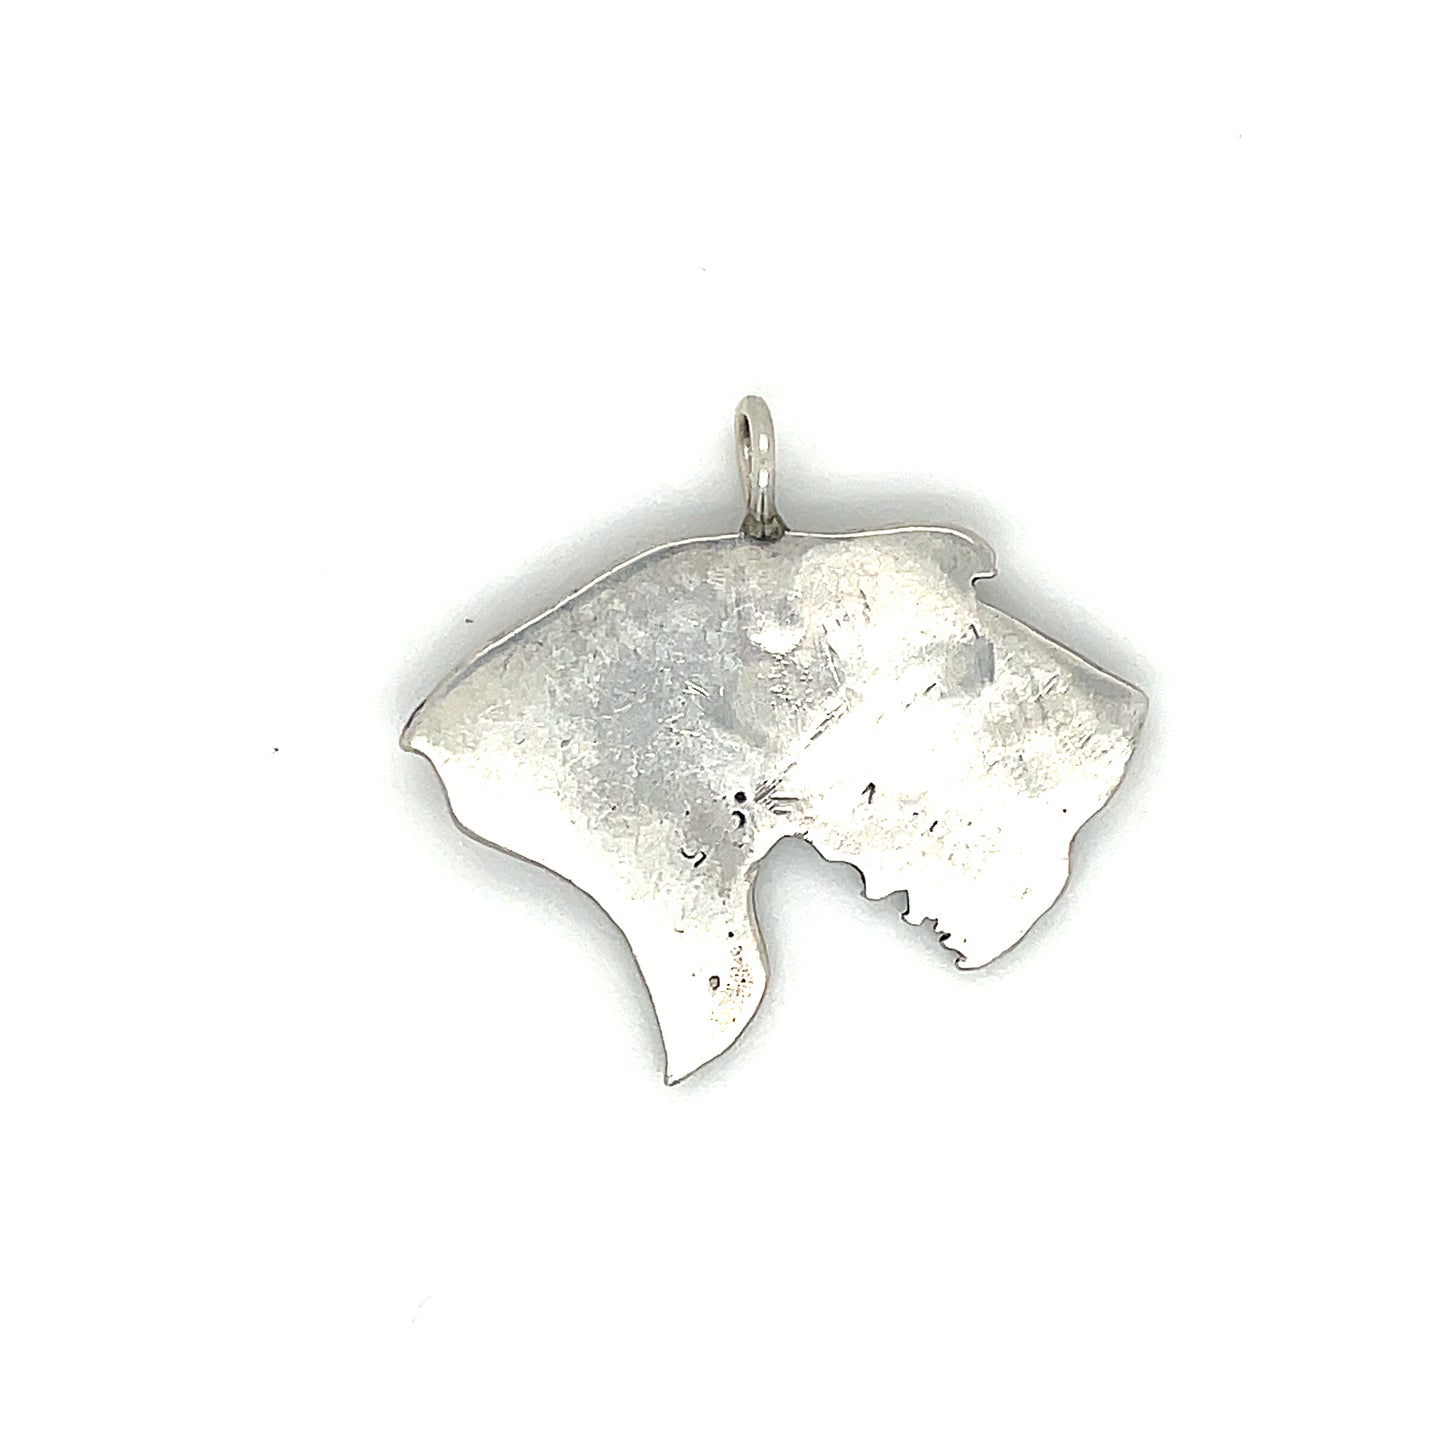 Vintage Sterling Silver Airdale Charm / Pendant 5.3g